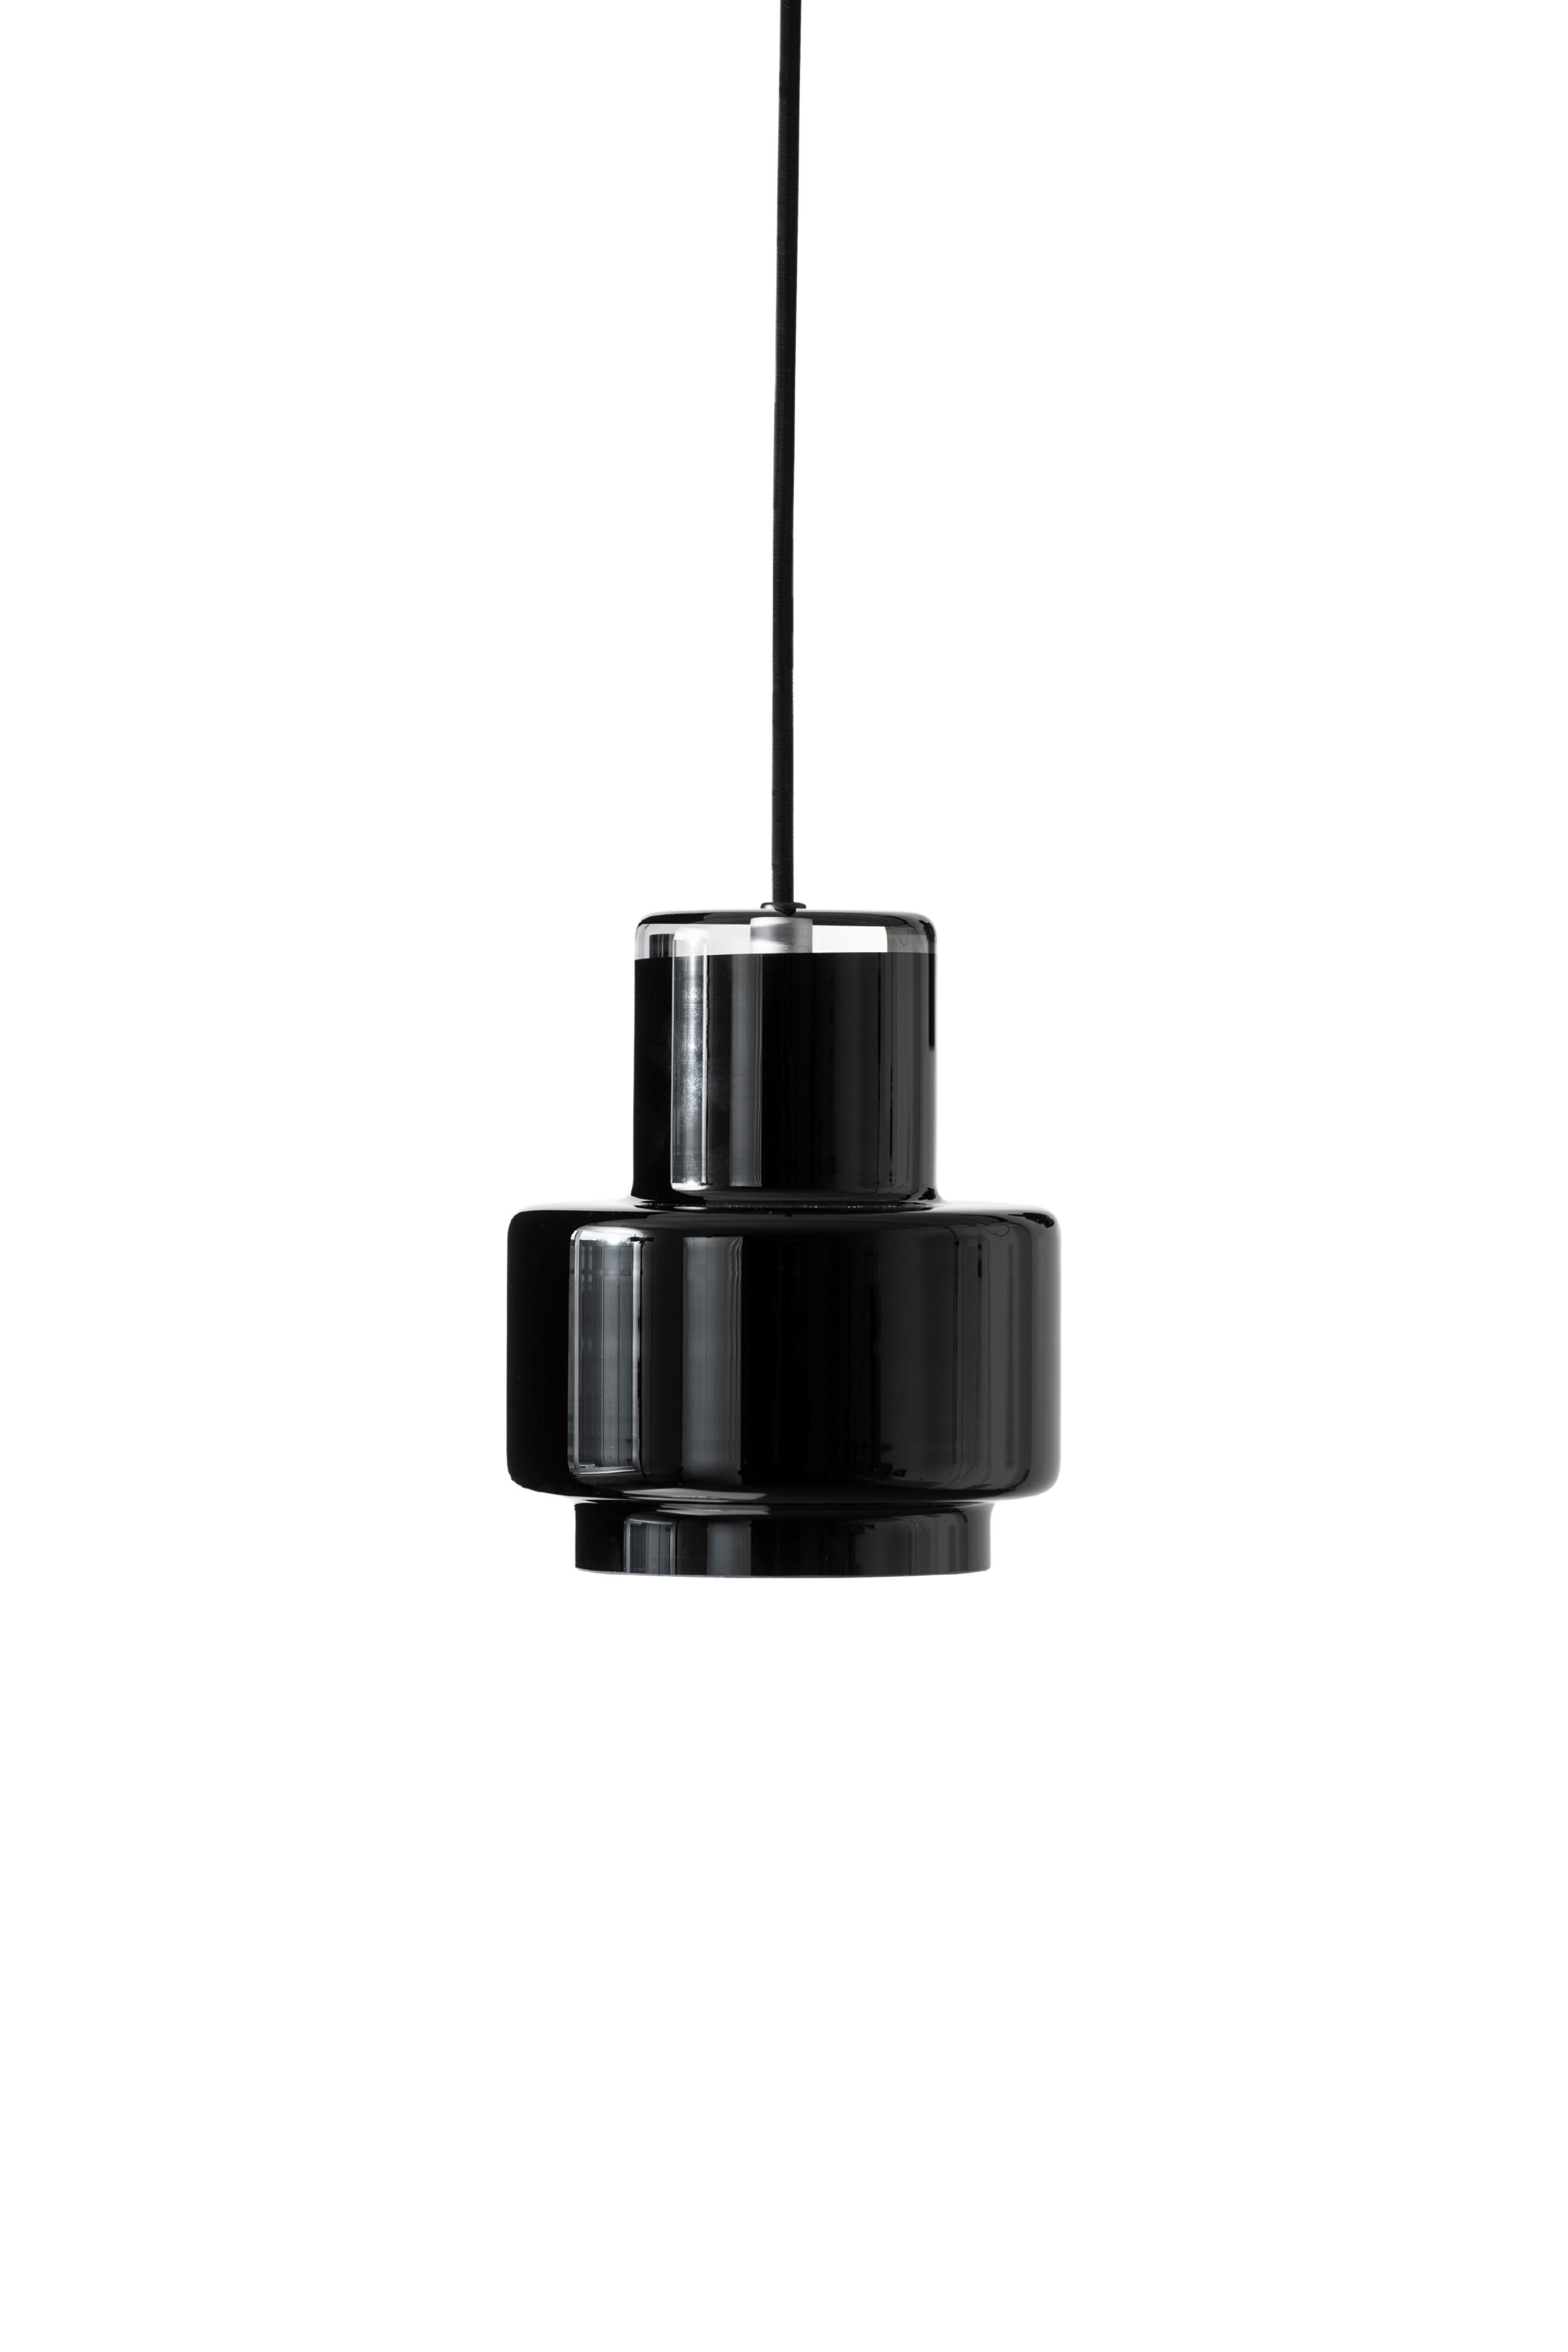 Contemporary 'Multi M' Glass Pendant in Black by Jokinen and Konu for Innolux